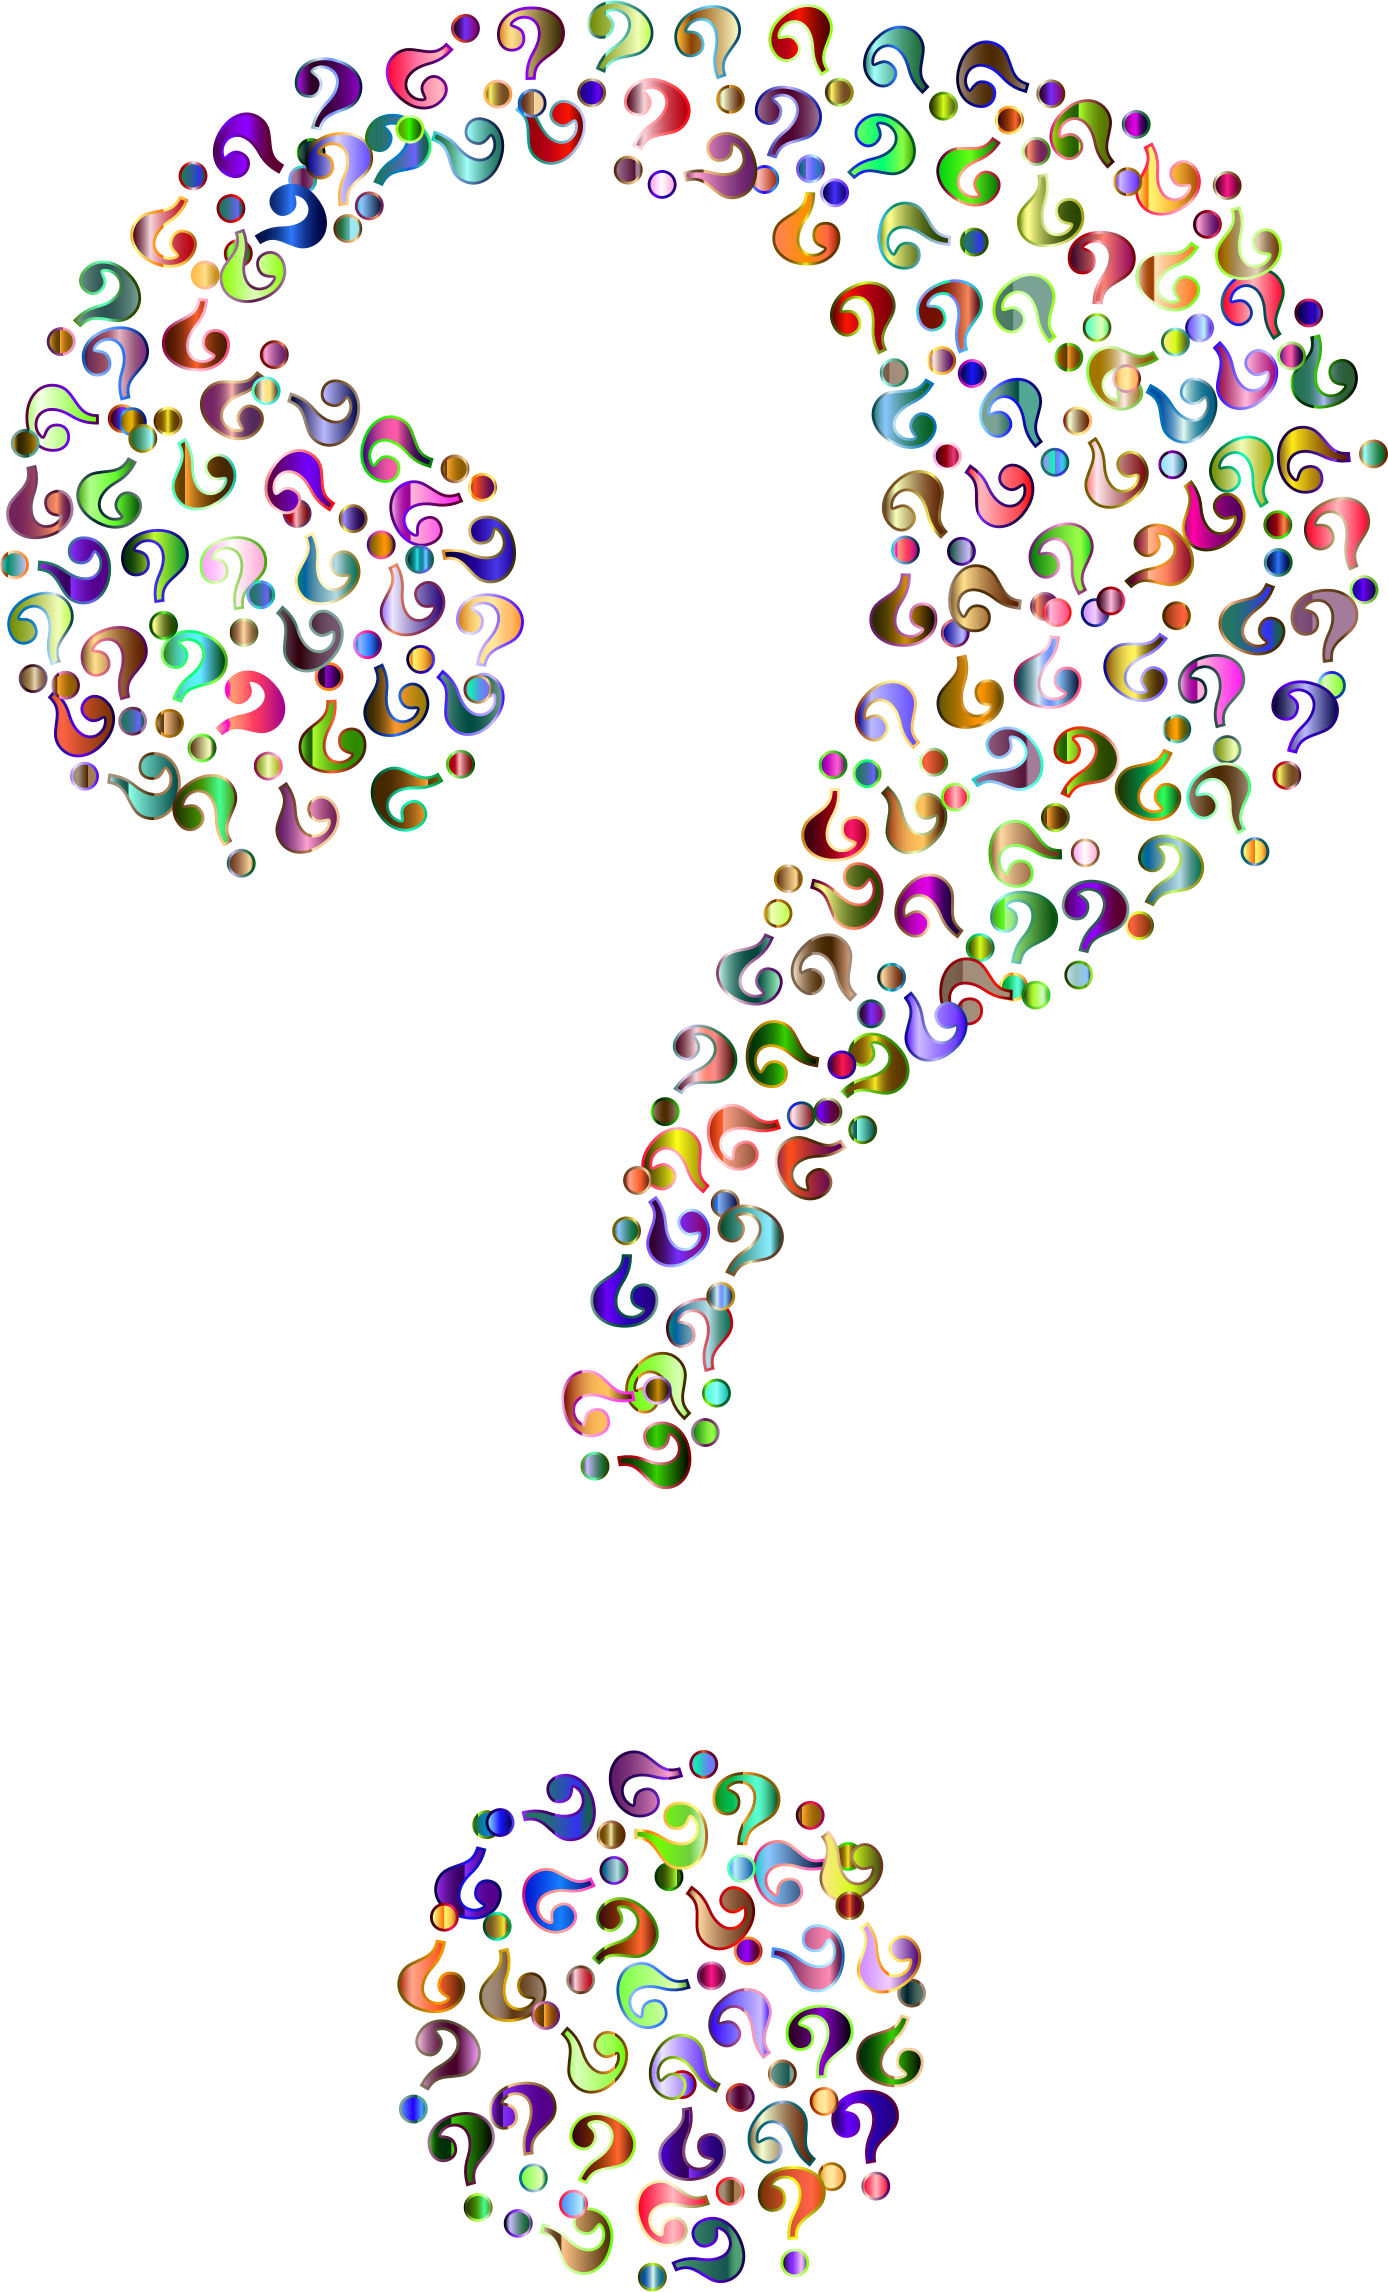 question mark clipart no background - photo #4